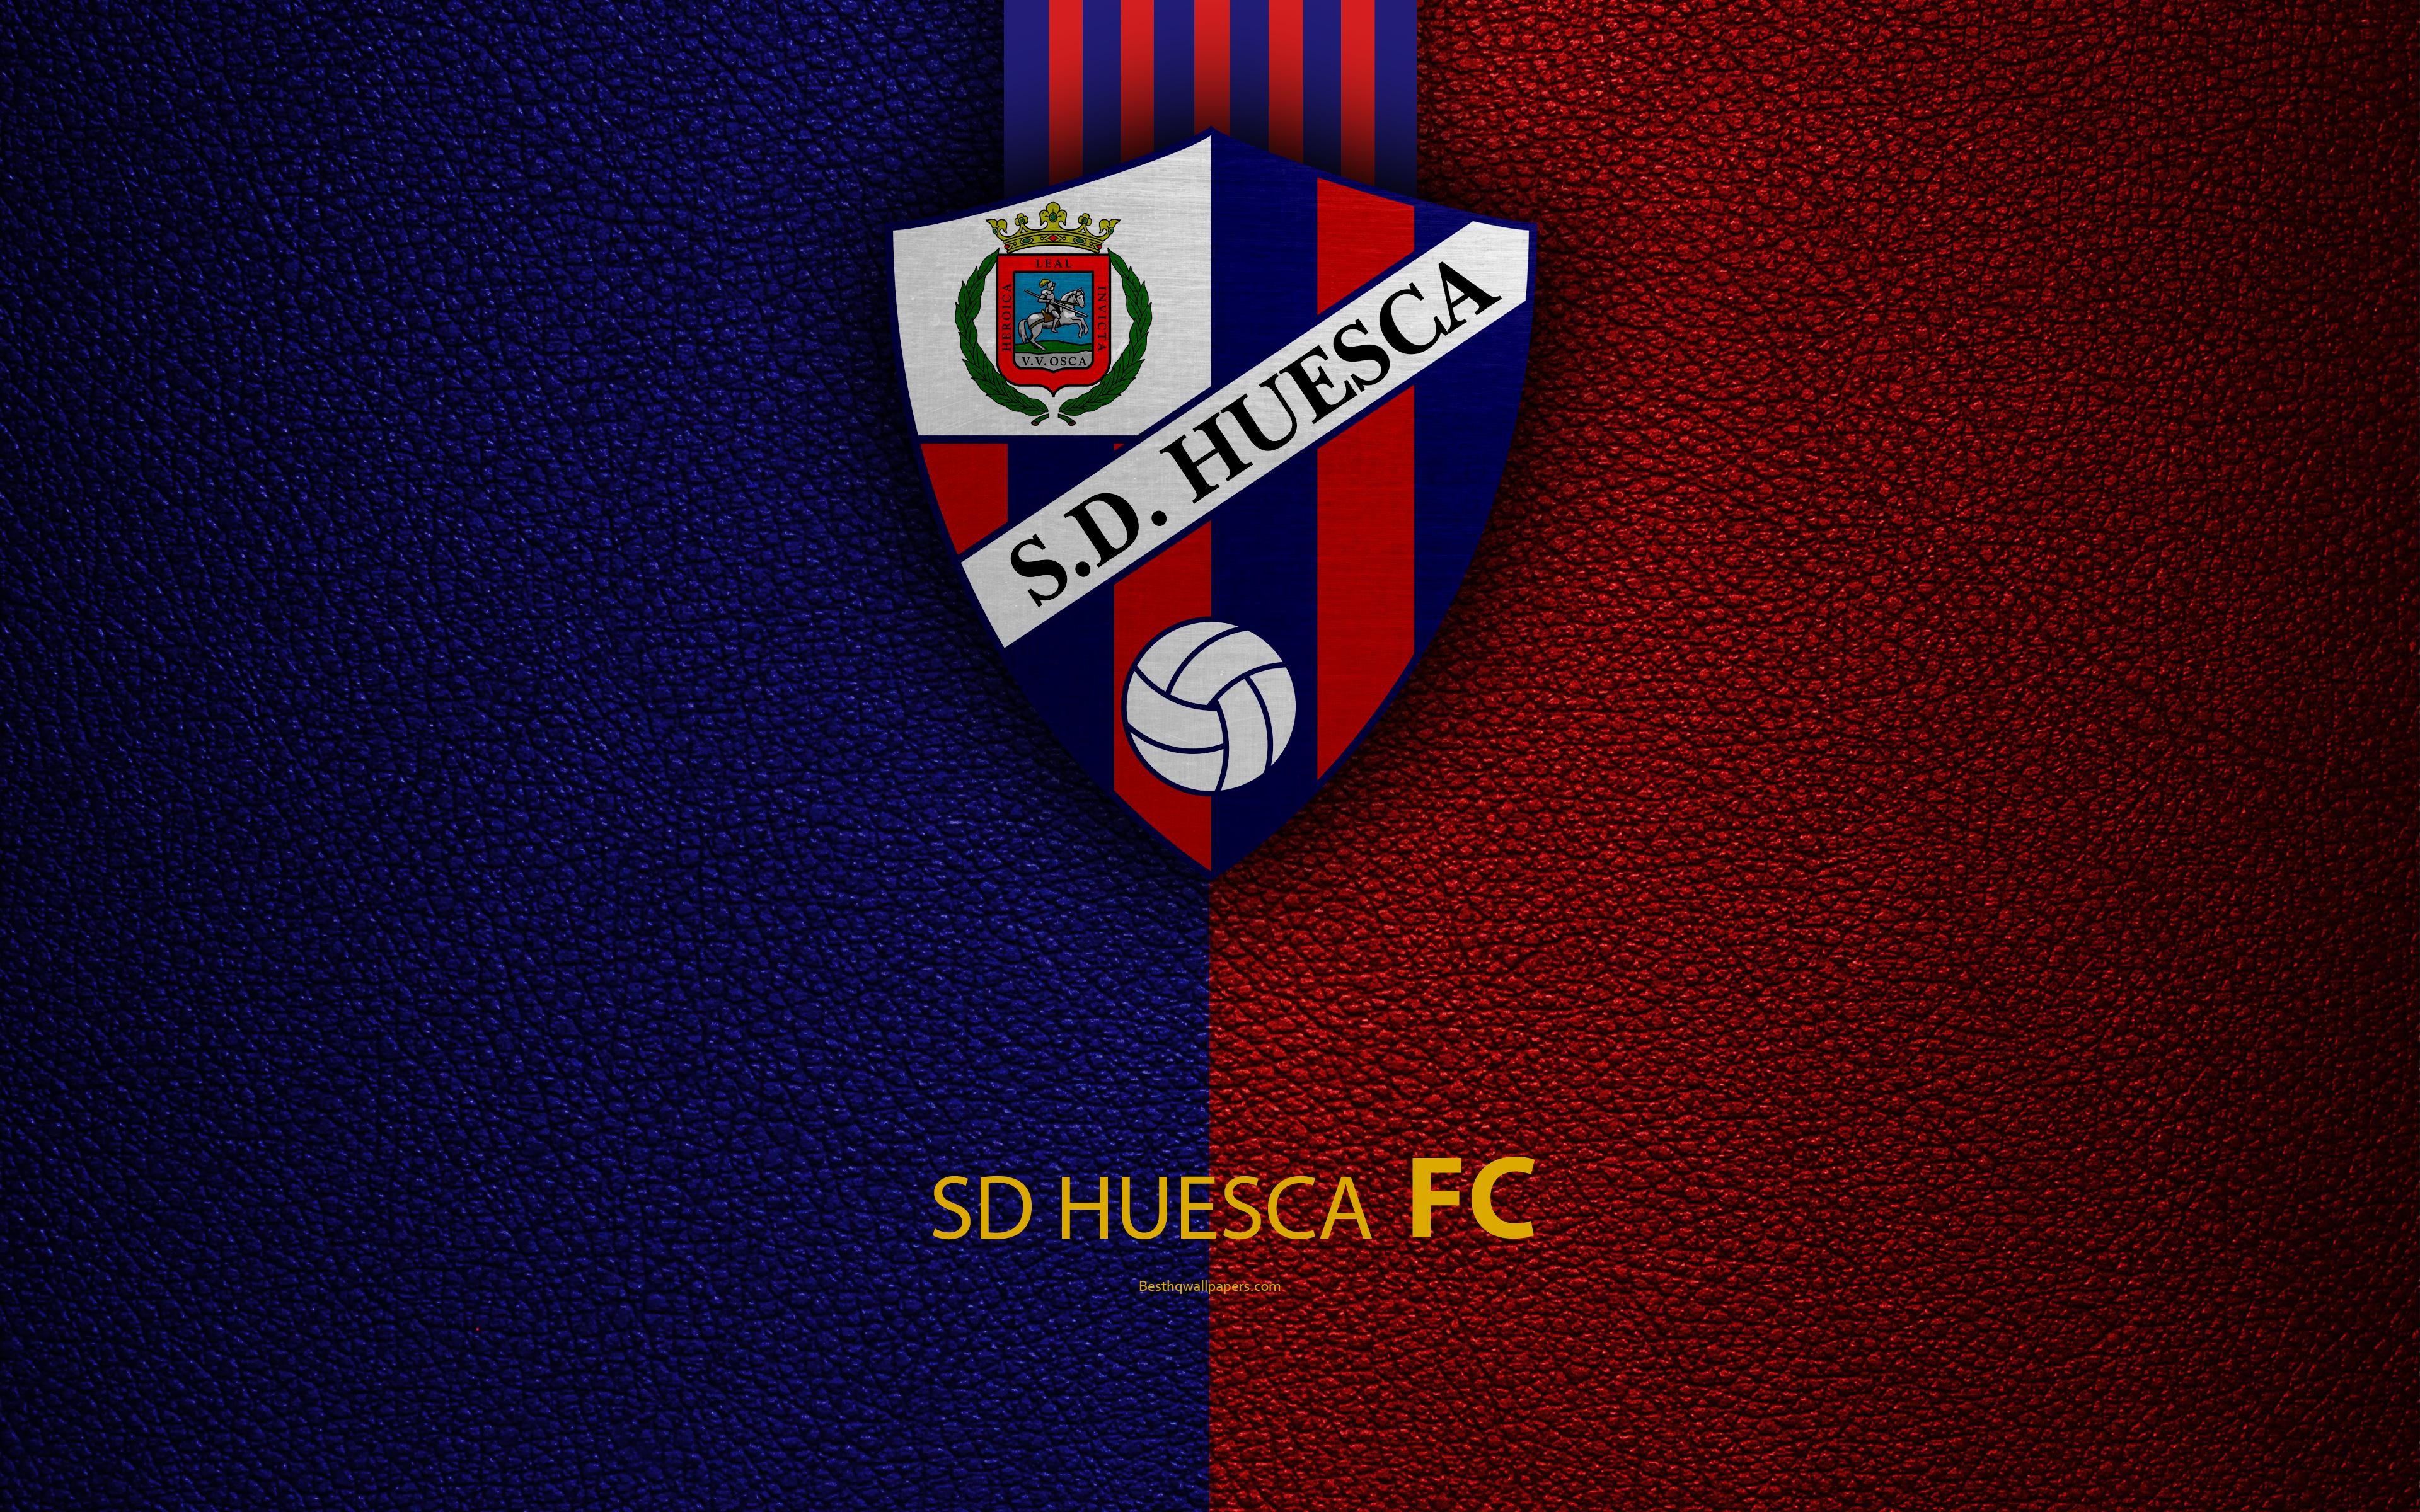 Download wallpaper SD Huesca FC, 4K, Spanish Football Club, leather